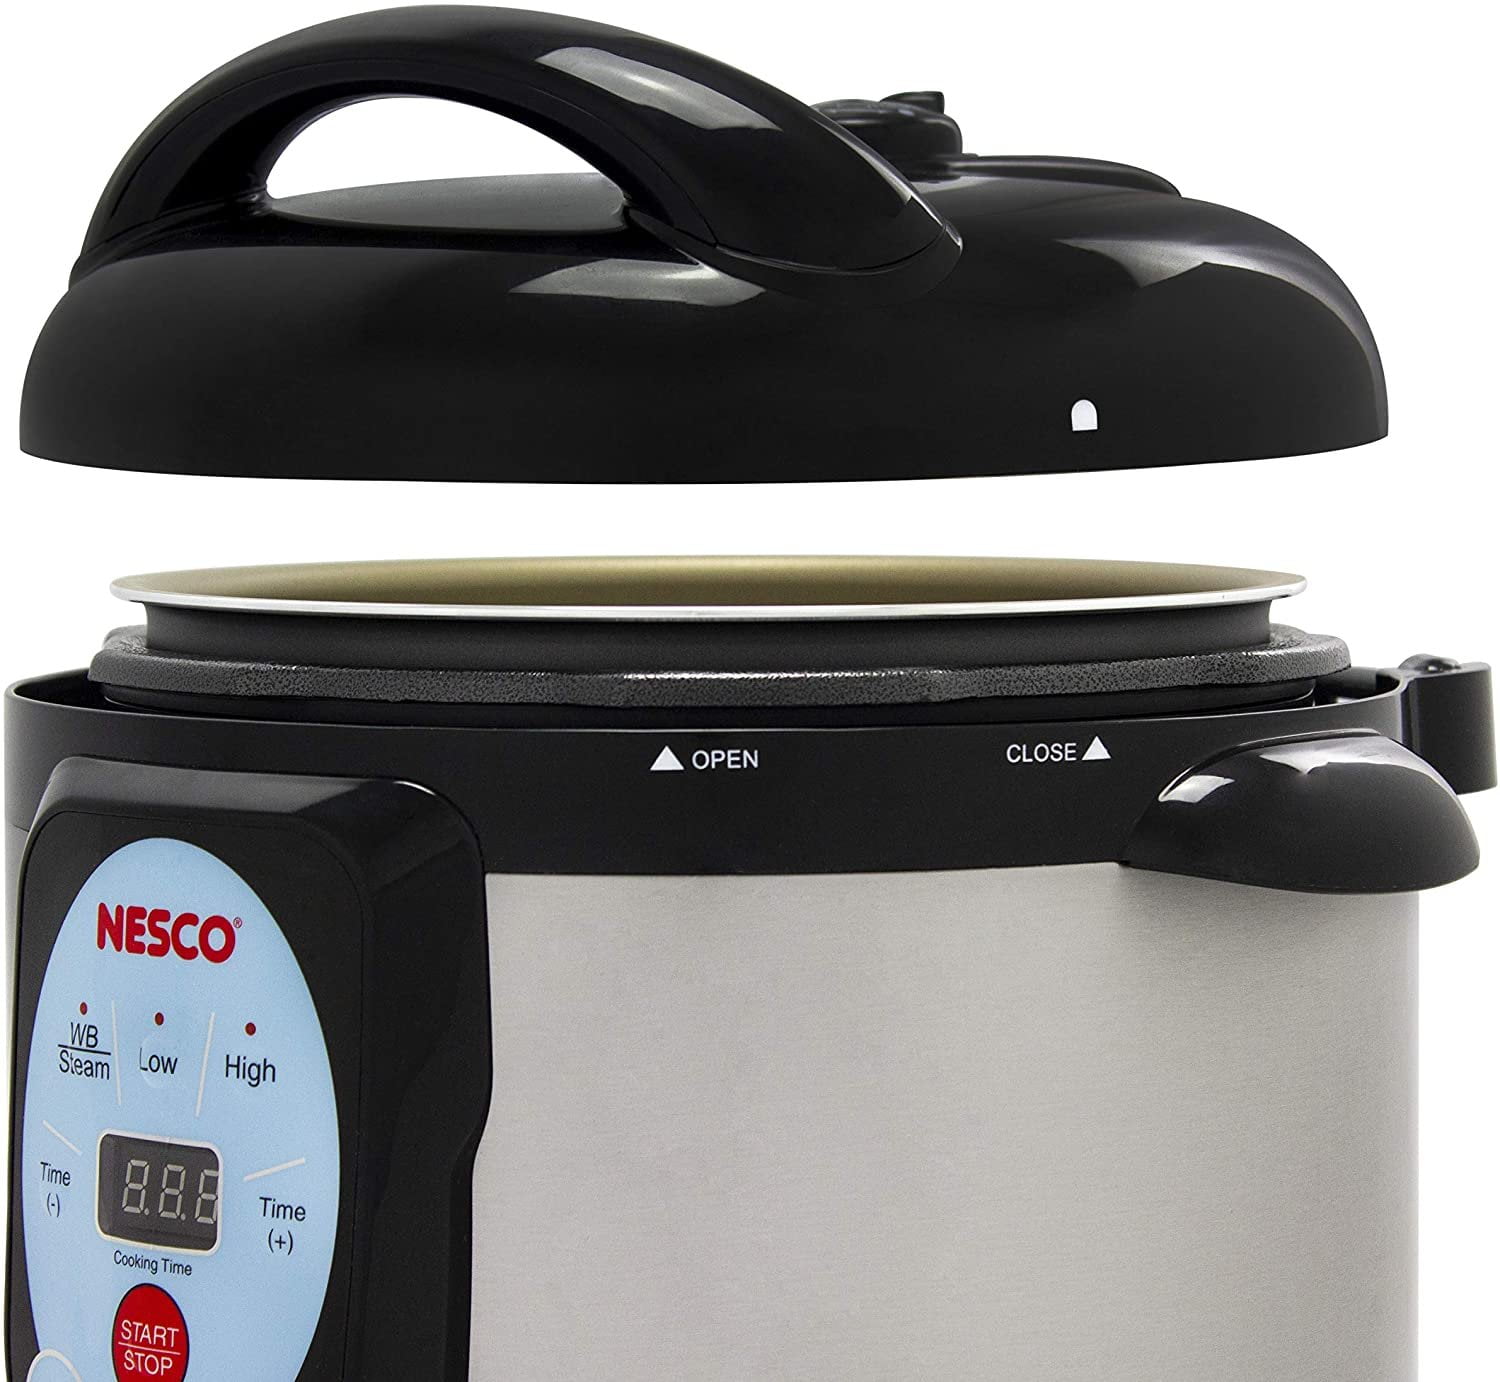 Nesco Canner/ Learning How To Use My New Nesco Digital Pressure Canner 